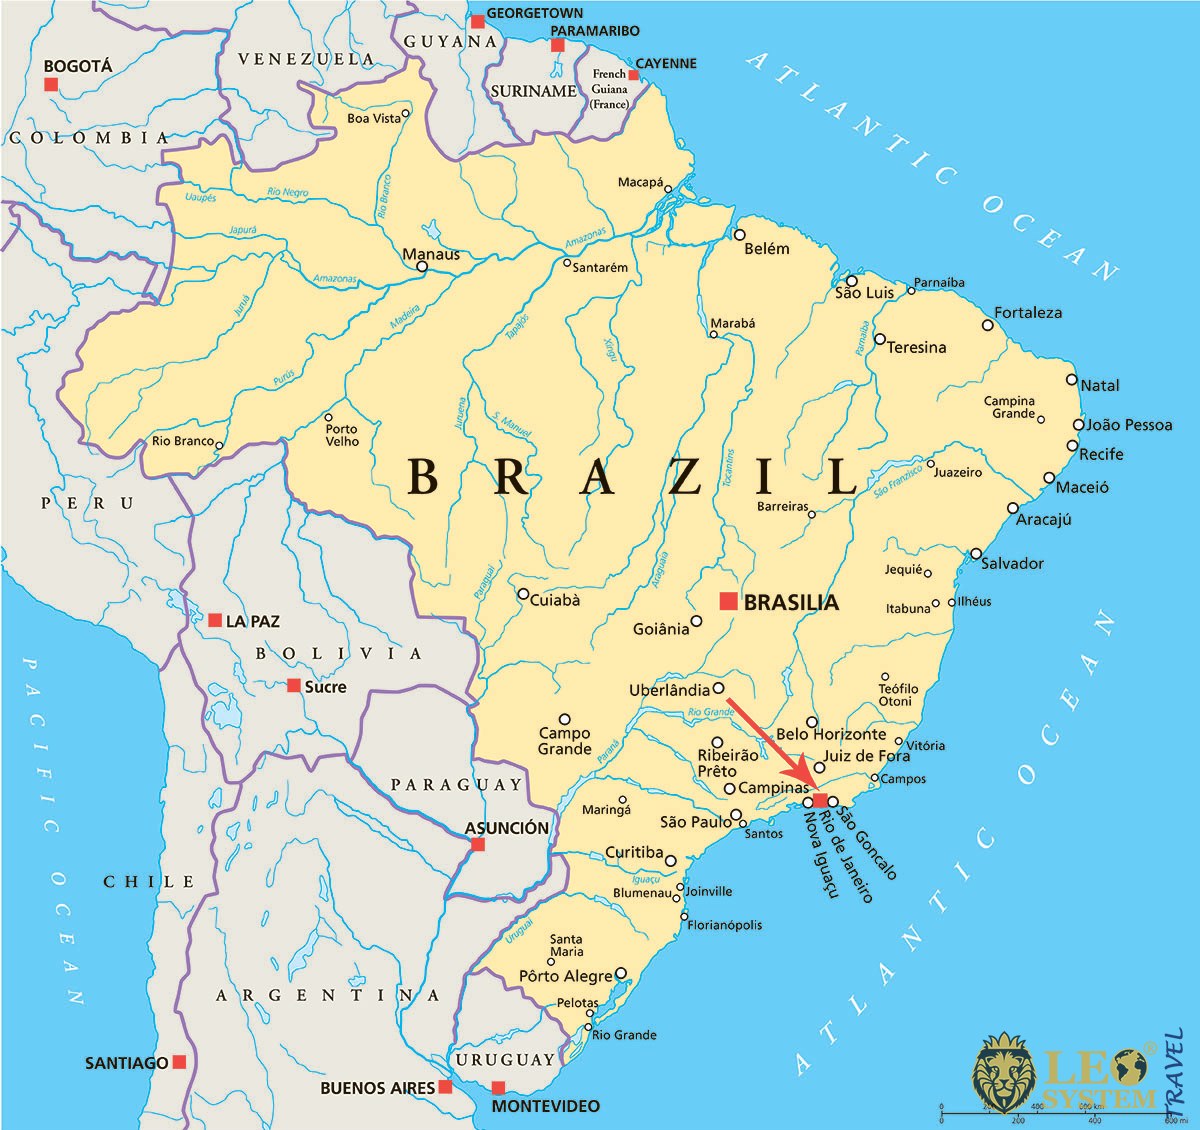 Image of a map showing the location of Rio de Janeiro, Brazil